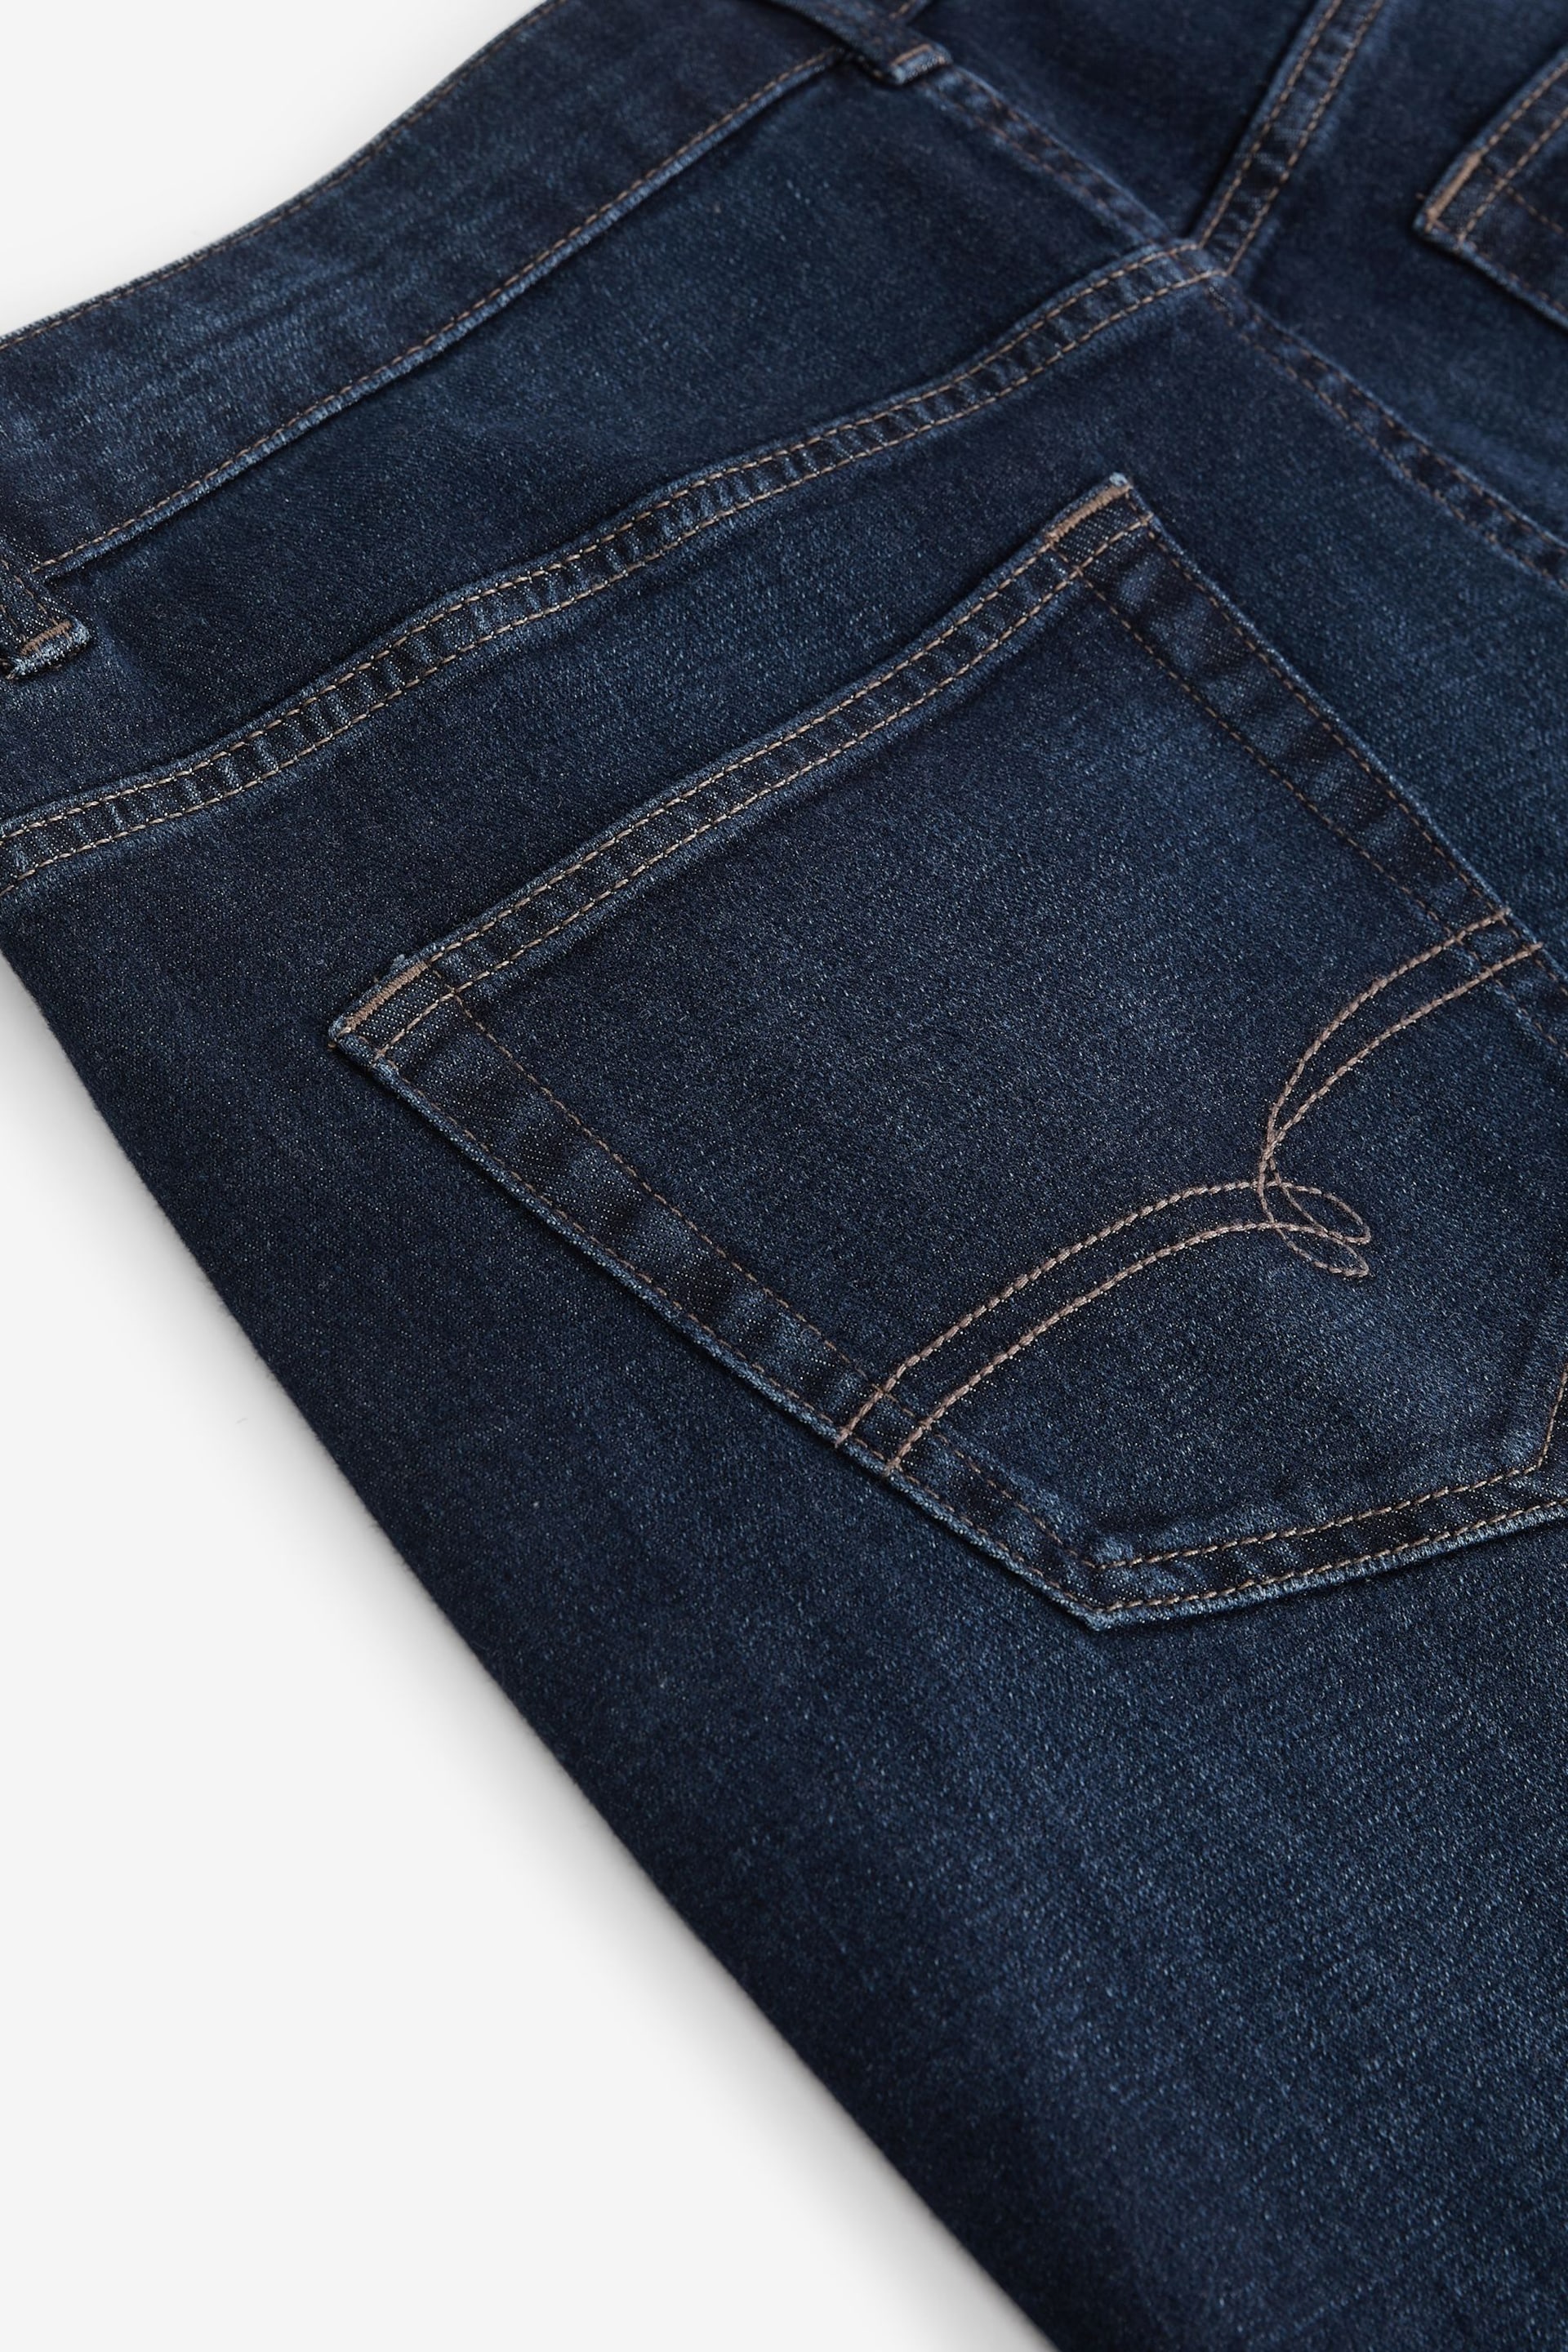 Blue Lightweight Jeans - Image 11 of 12